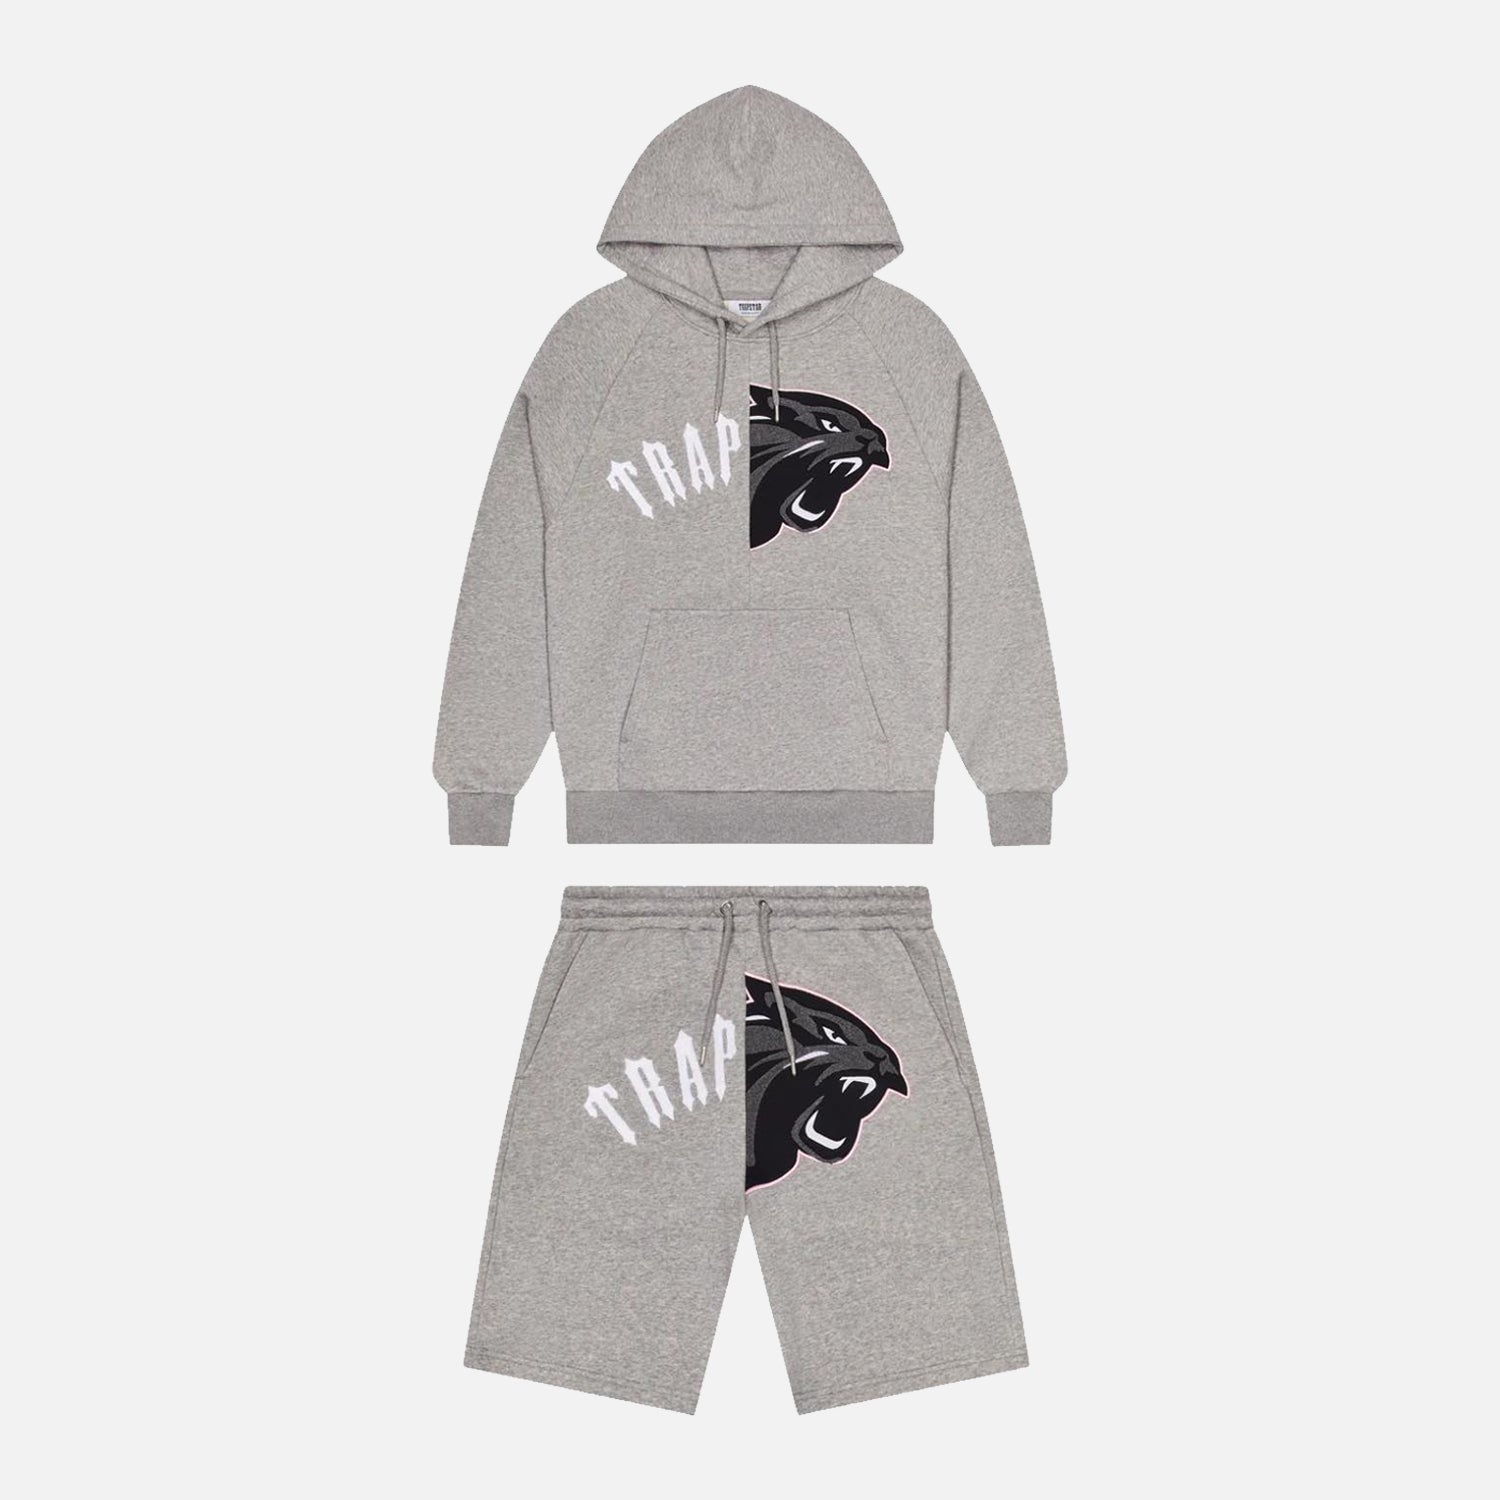 Trapstar Shooters Arch Hooded Short Set - Grey